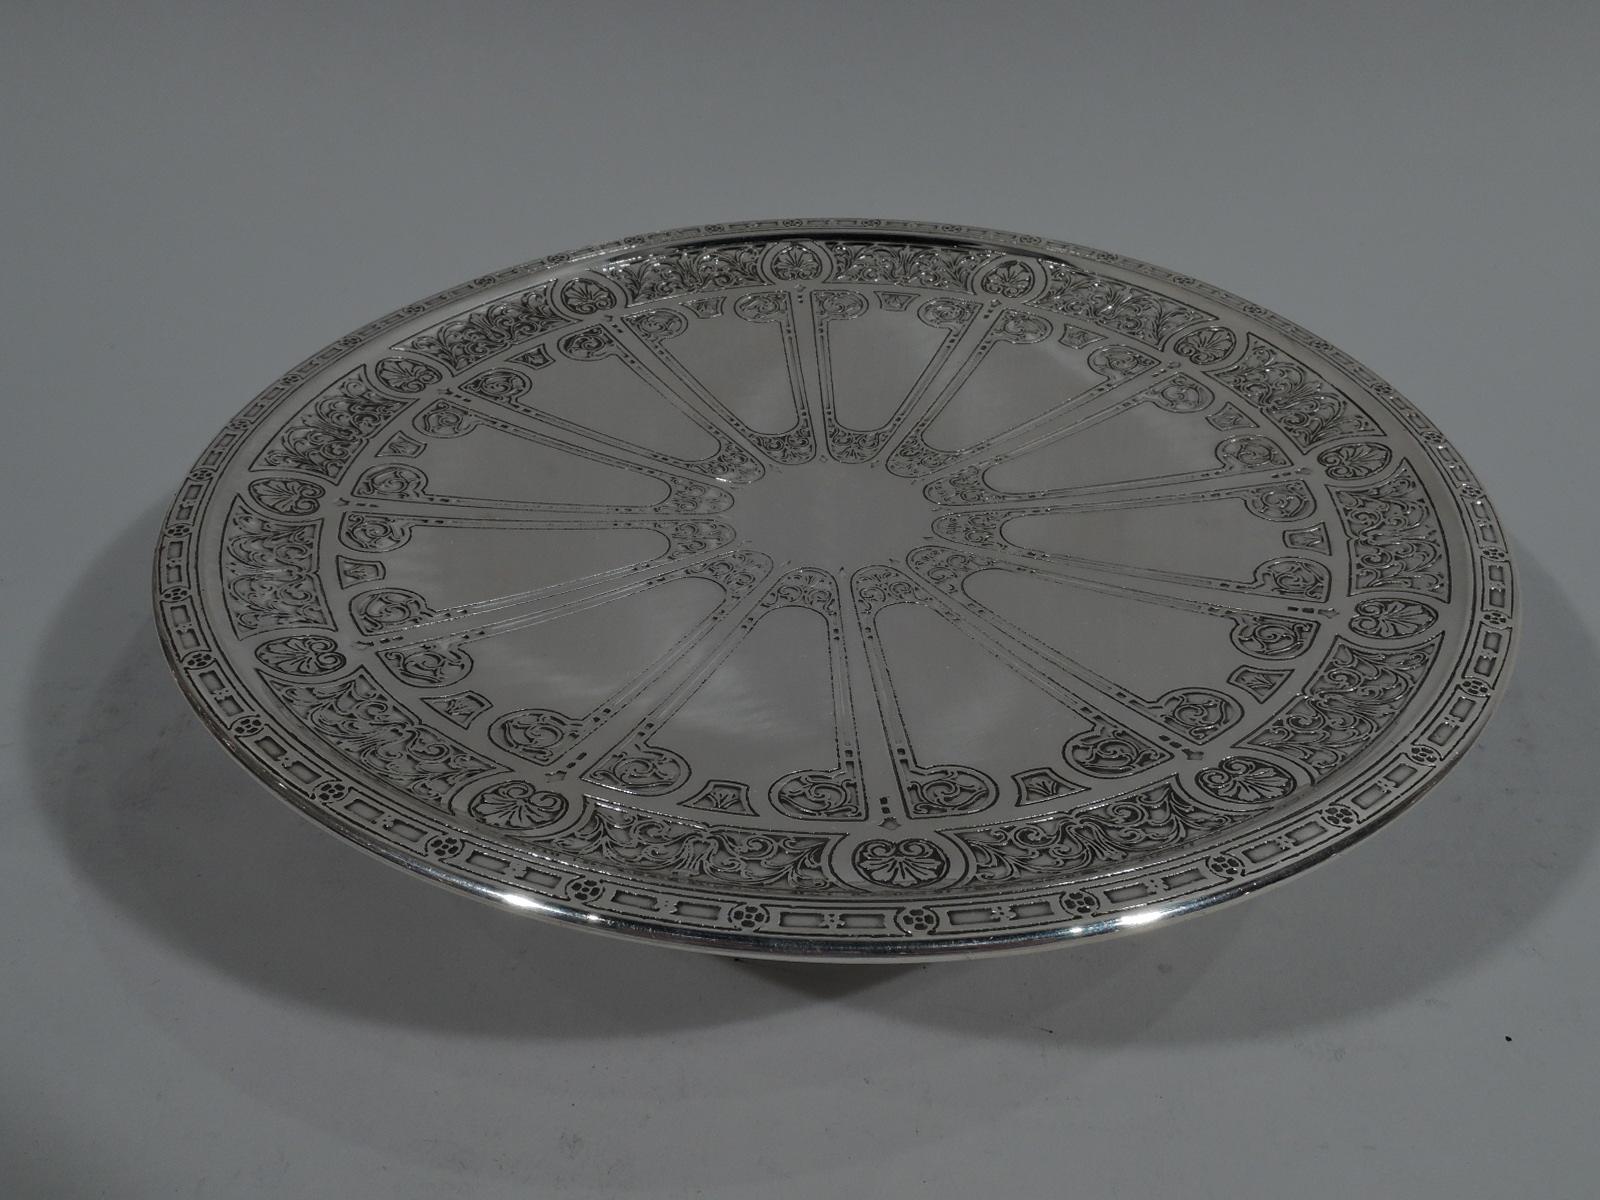 Pair of classical sterling silver compotes. Each: Round plate on raised and spread foot. Acid-etched ornament: Vacant center radiating V-Form frames with volute scroll terminals, in turn, bordered by alternating scallop shells and leafy scrolls. Rim